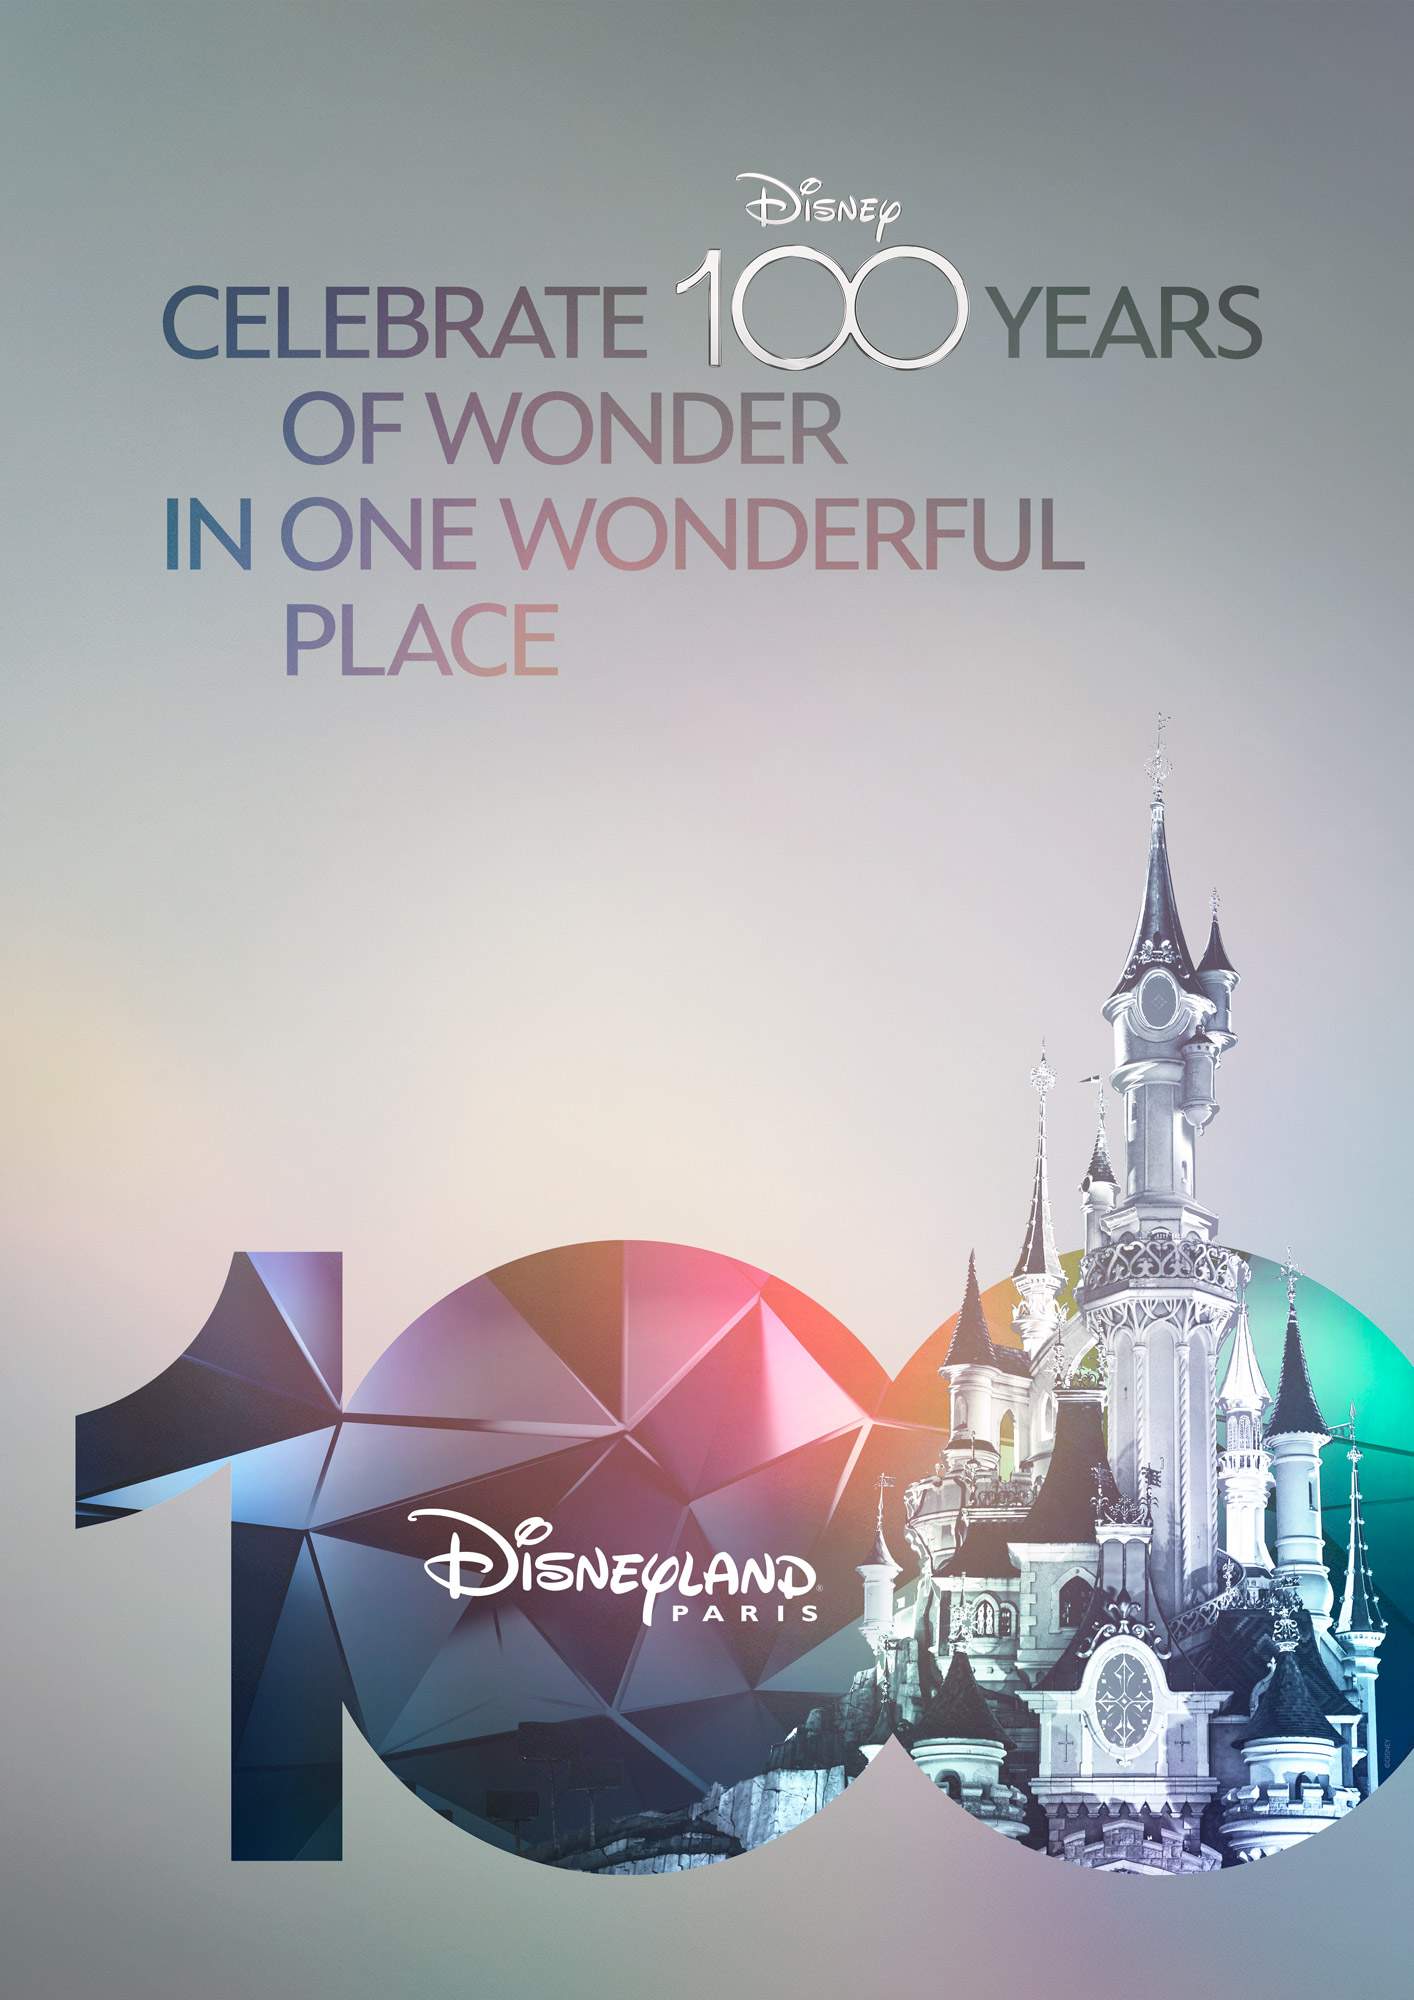 The Walt Disney Company is getting ready to celebrate a 100 Years